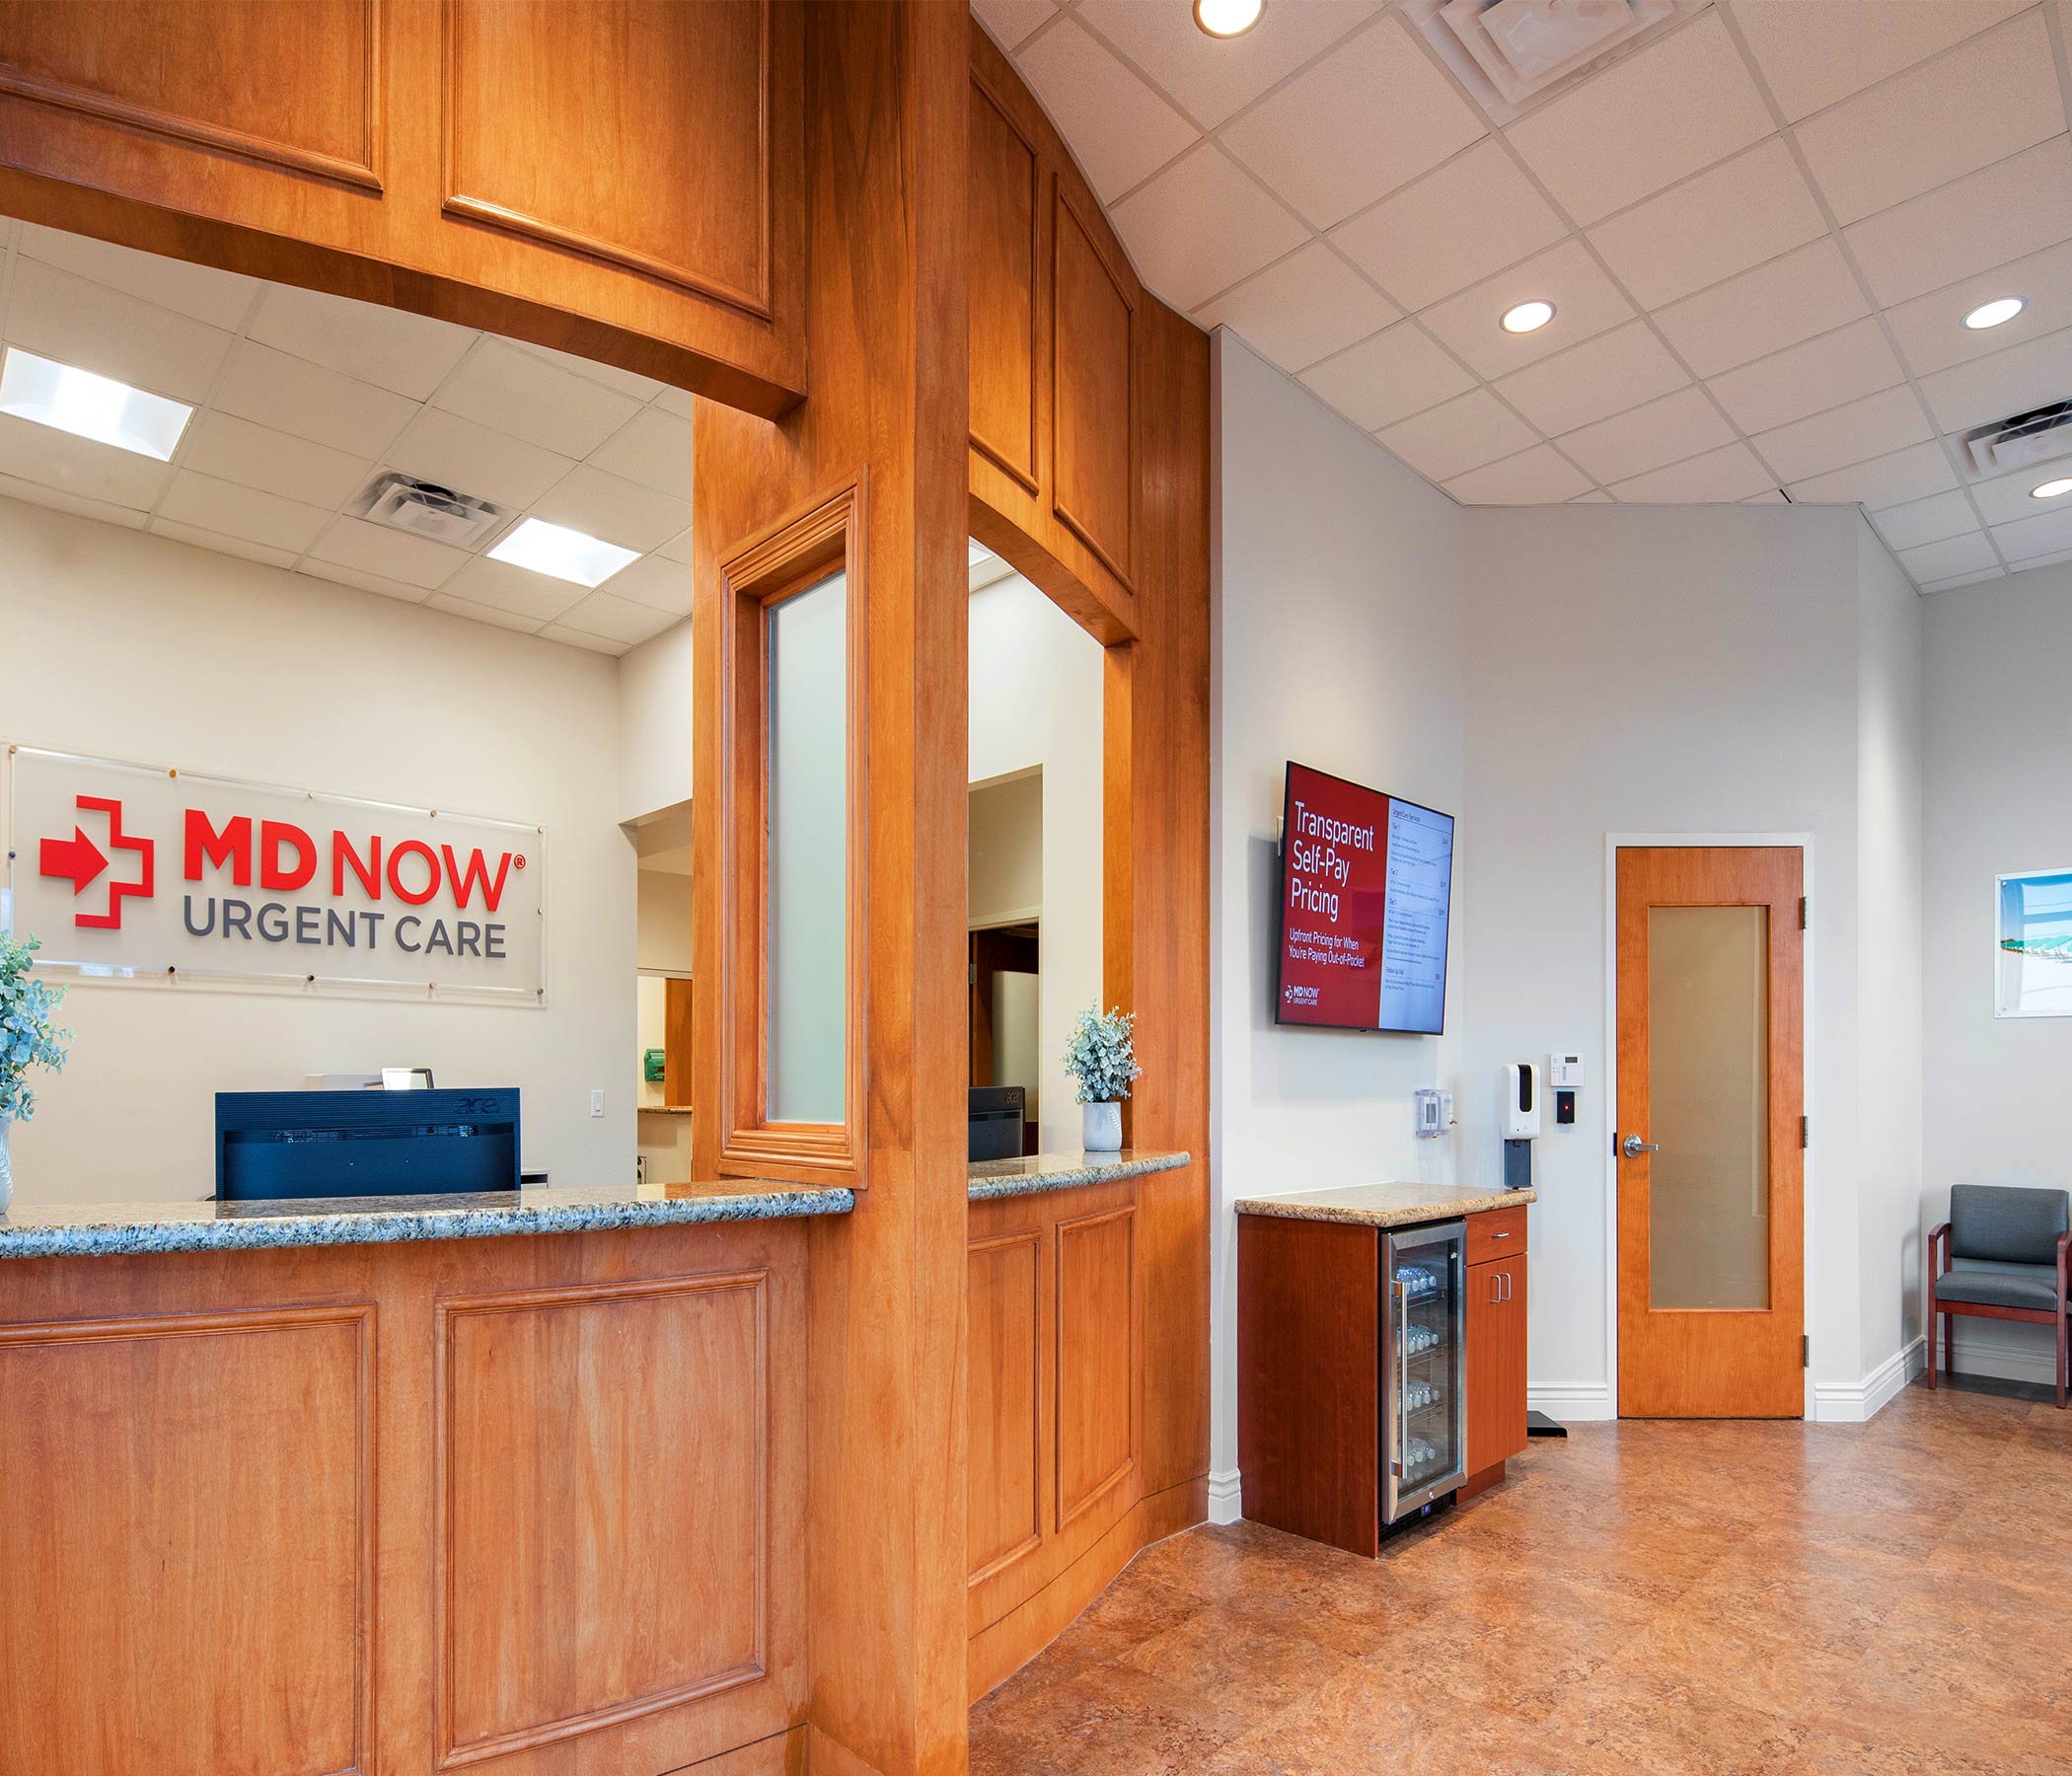 MD Now Urgent Care, No Appt. Necessary, walk ins welcome.